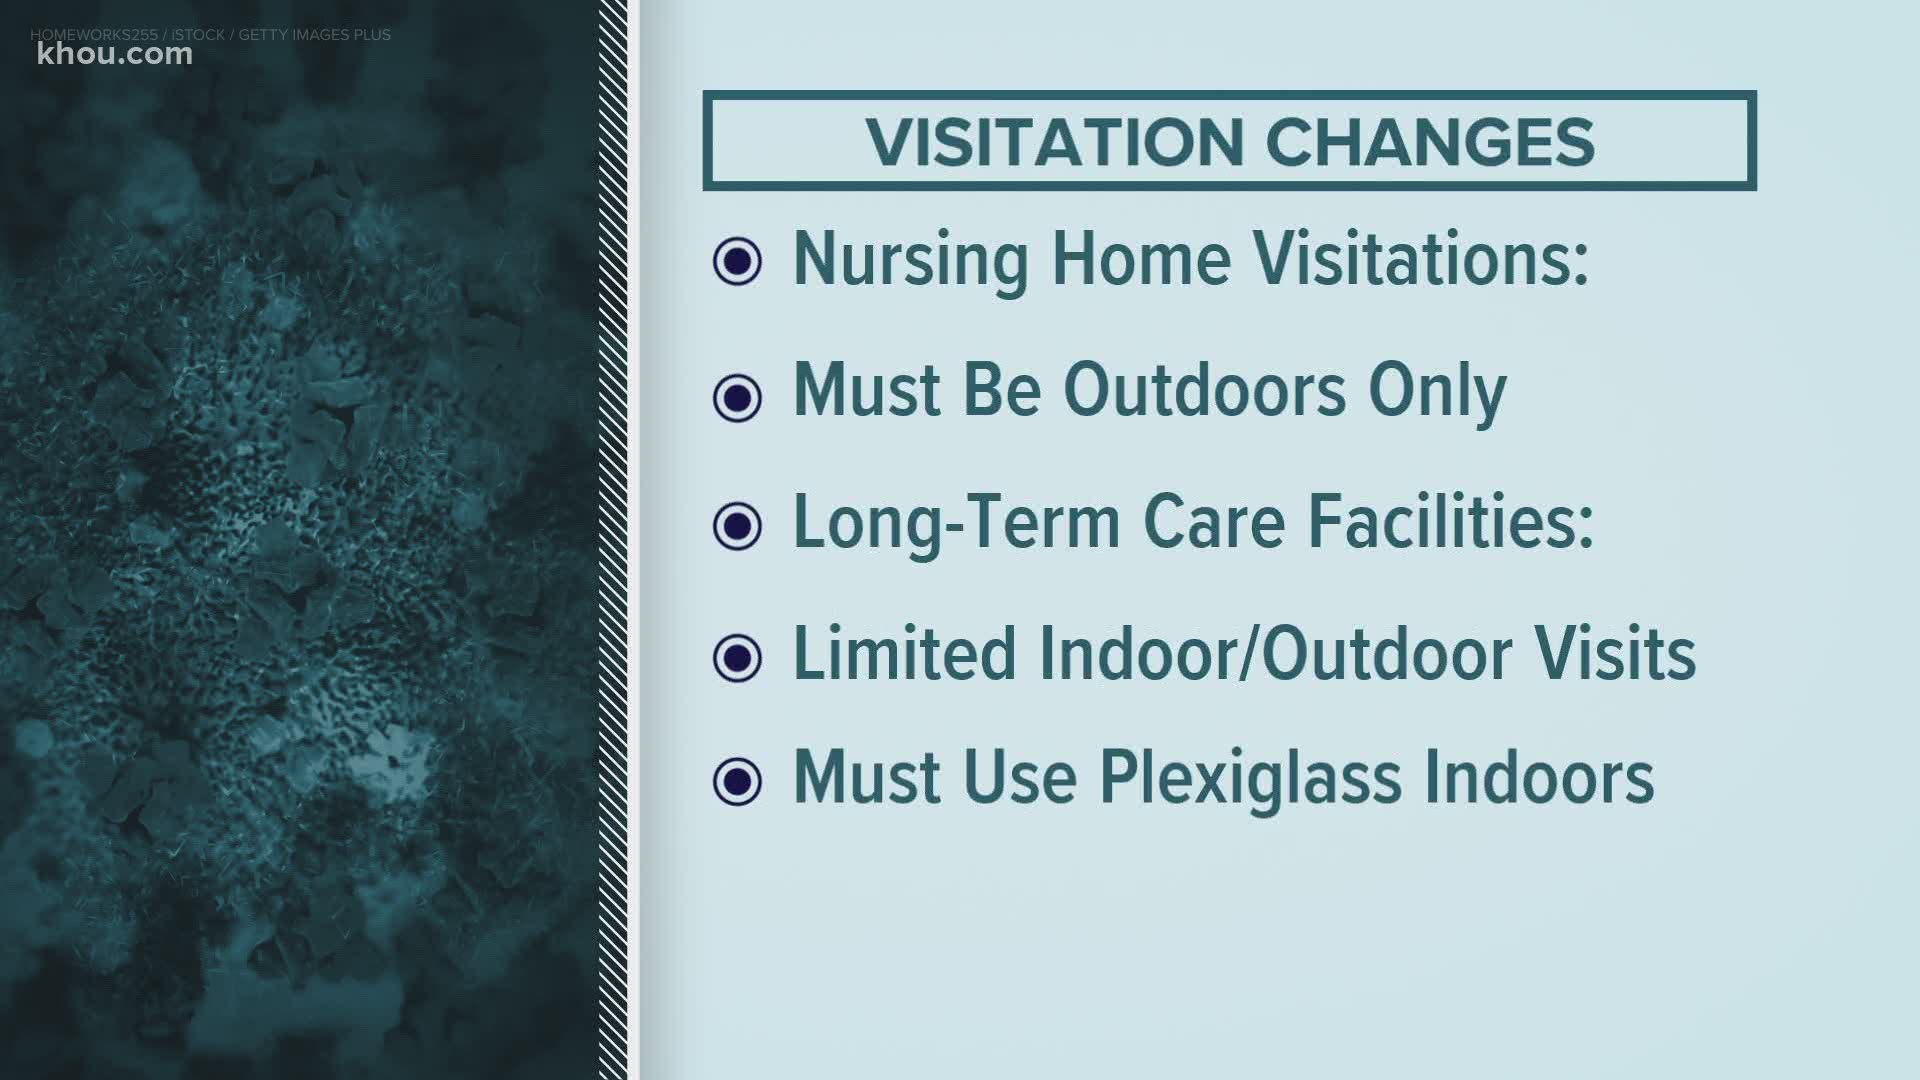 Texans have waited months to visit loved ones at the facilities. They've been off-limits due to the threat of spreading the virus to those who are most at-risk.